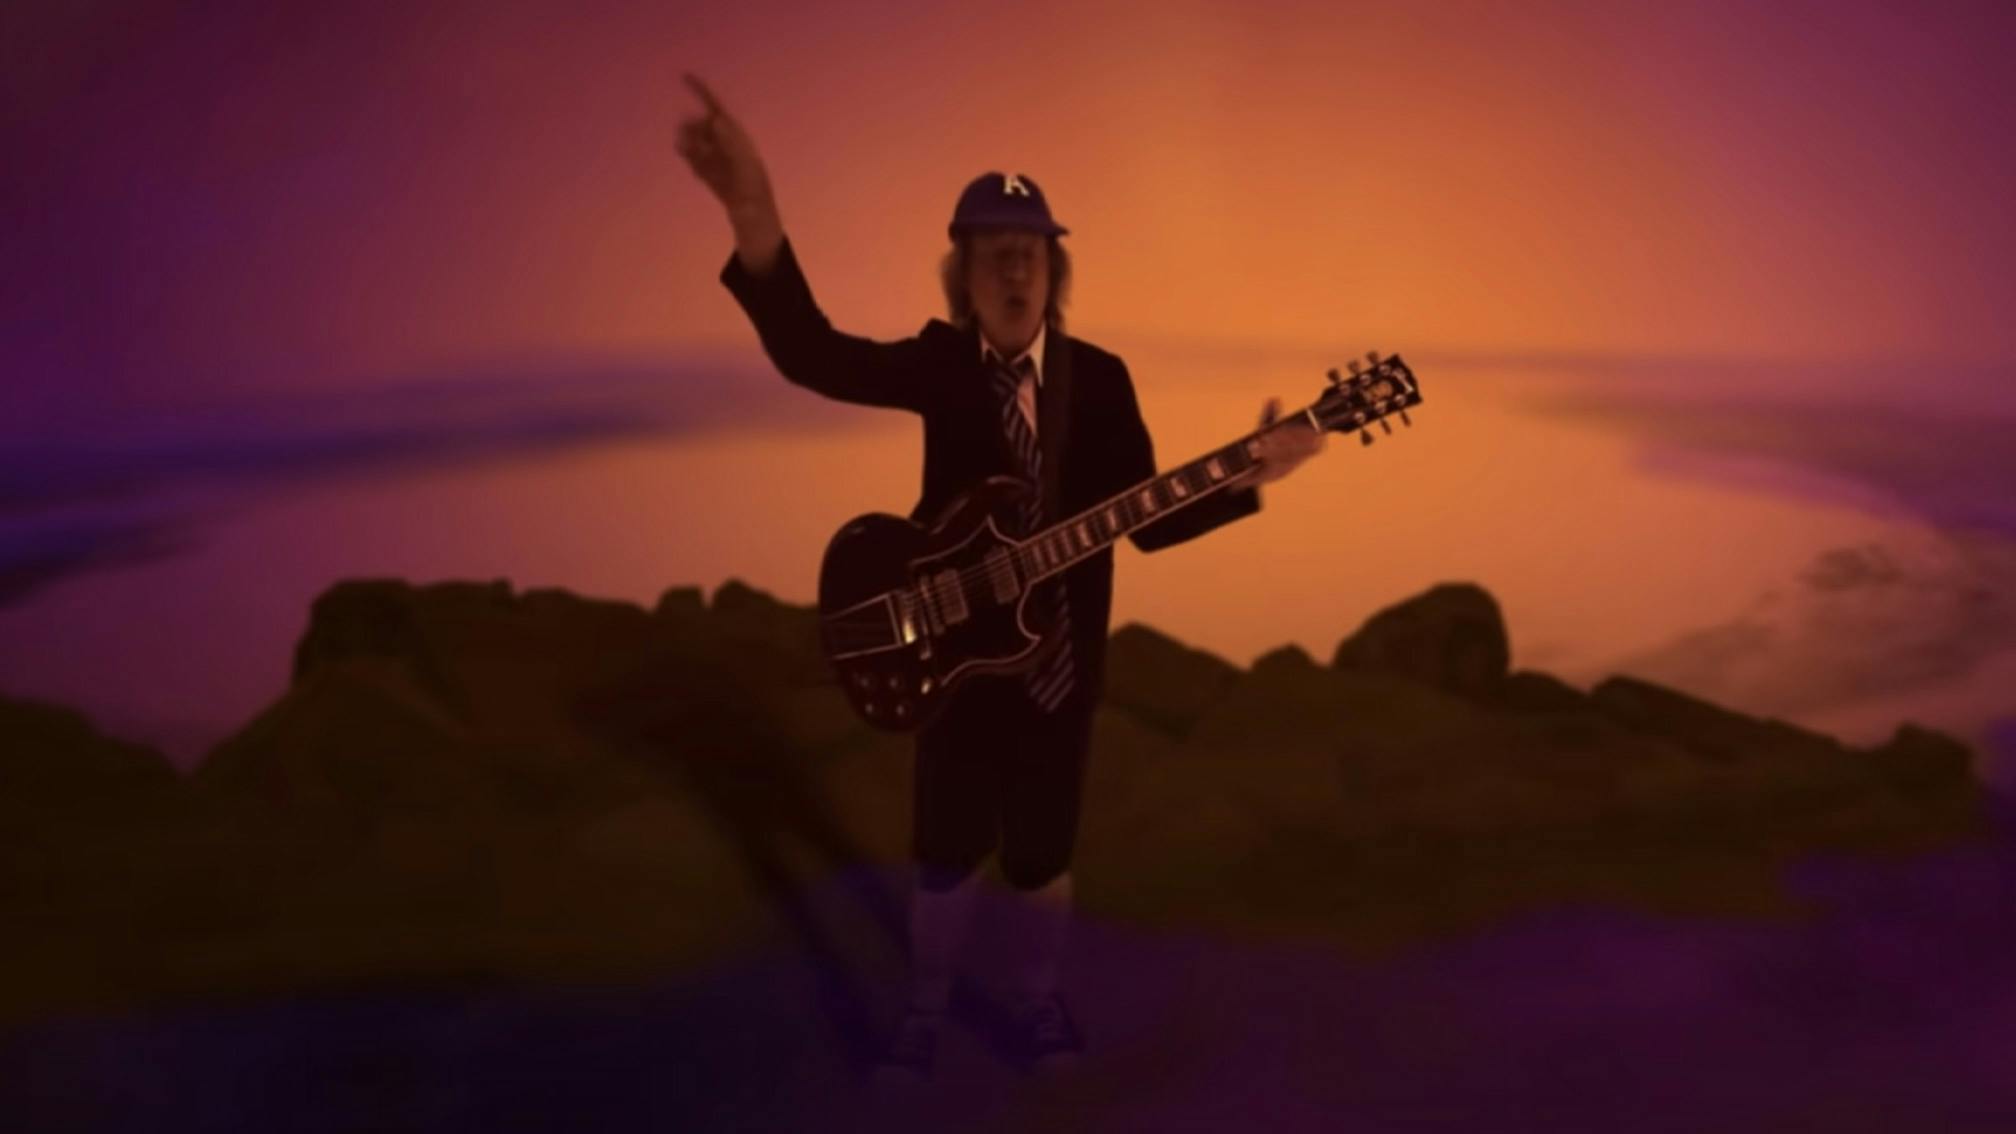 AC/DC rock out inside a crystal ball in new video for Witch's Spell